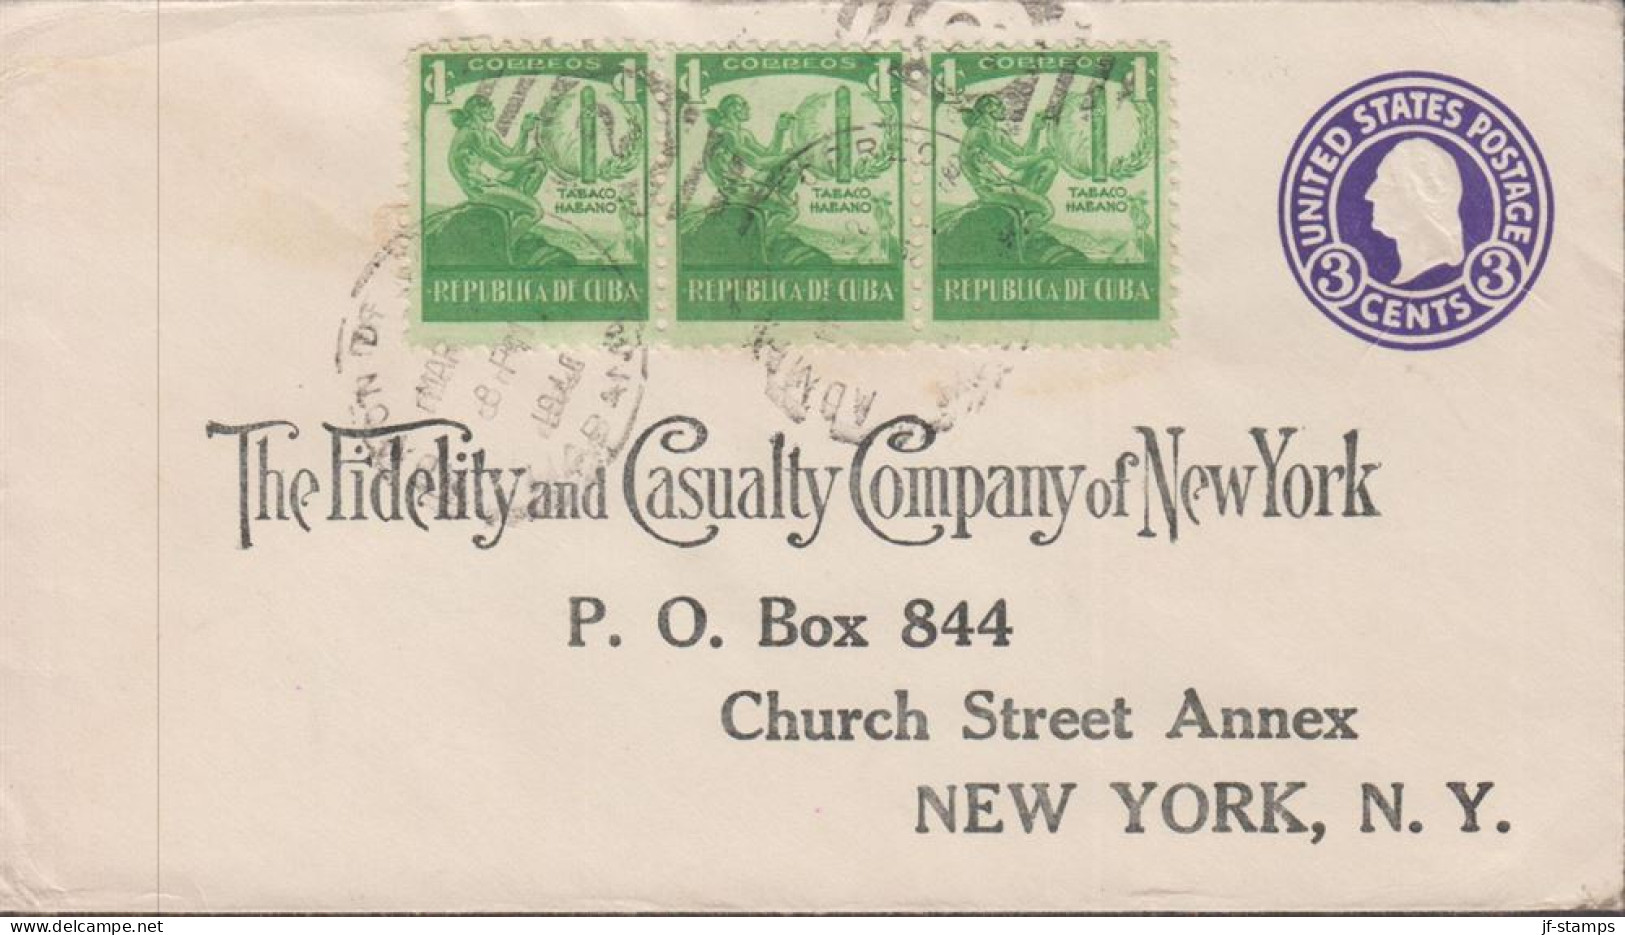 1940. CUBA. Fine US 3 CENTS Envelope To The Fidelity And Casualty Company Of New York. USA Wi... (Michel 158) - JF438247 - Covers & Documents